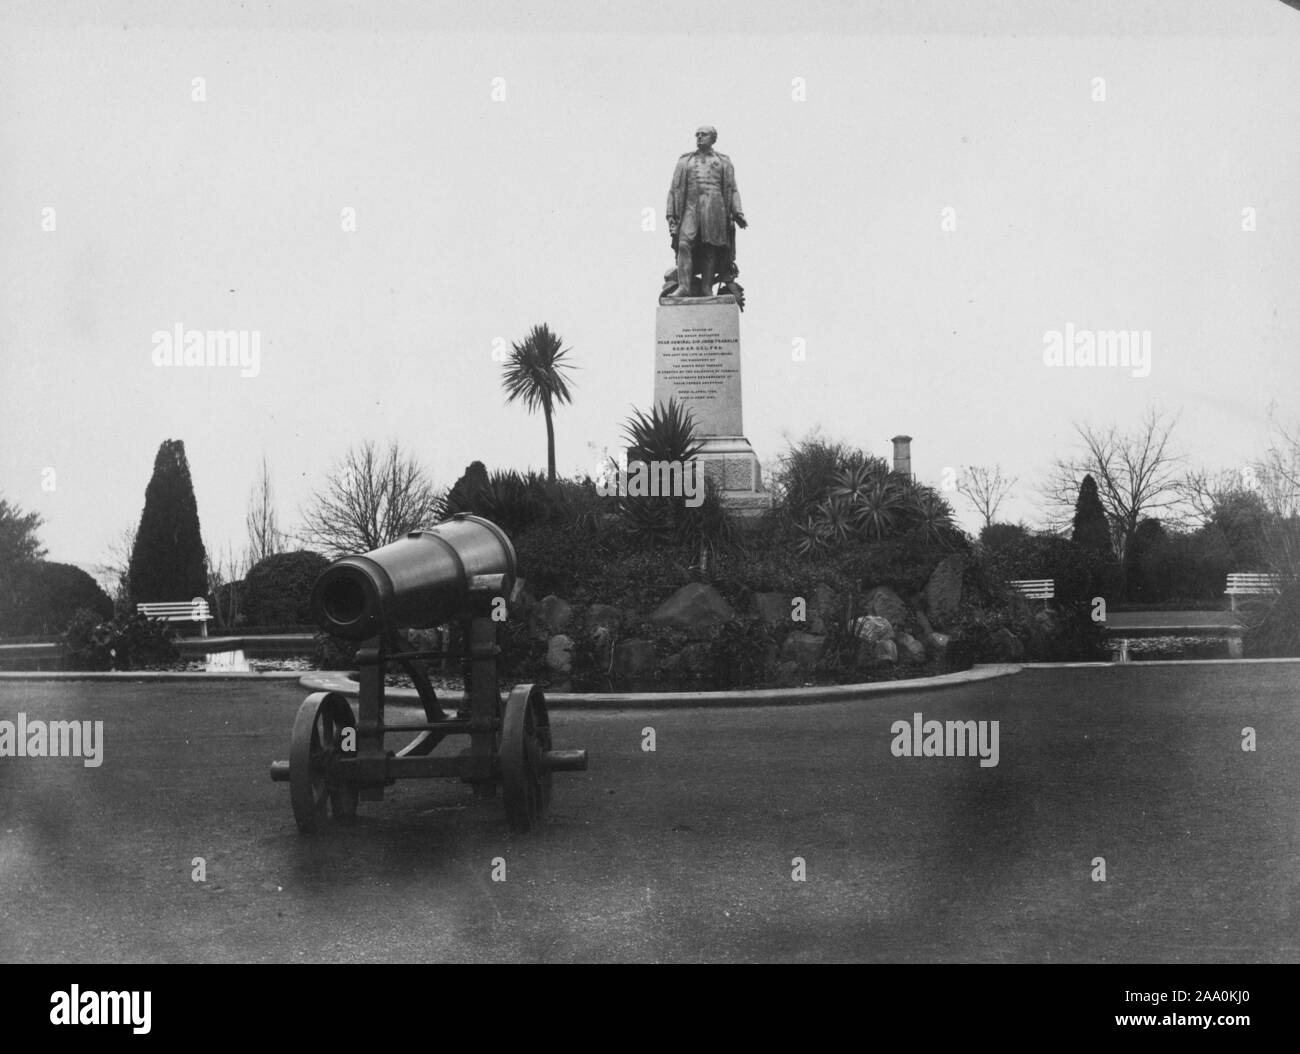 Black and white photograph of a cannon and a statue of the British Royal Navy officer and explorer of the Arctic, Rear Admiral Sir John Franklin in Franklin Square in Hobart, Tasmania, Australia, by photographer Frank Coxhead, 1885. From the New York Public Library. () Stock Photo